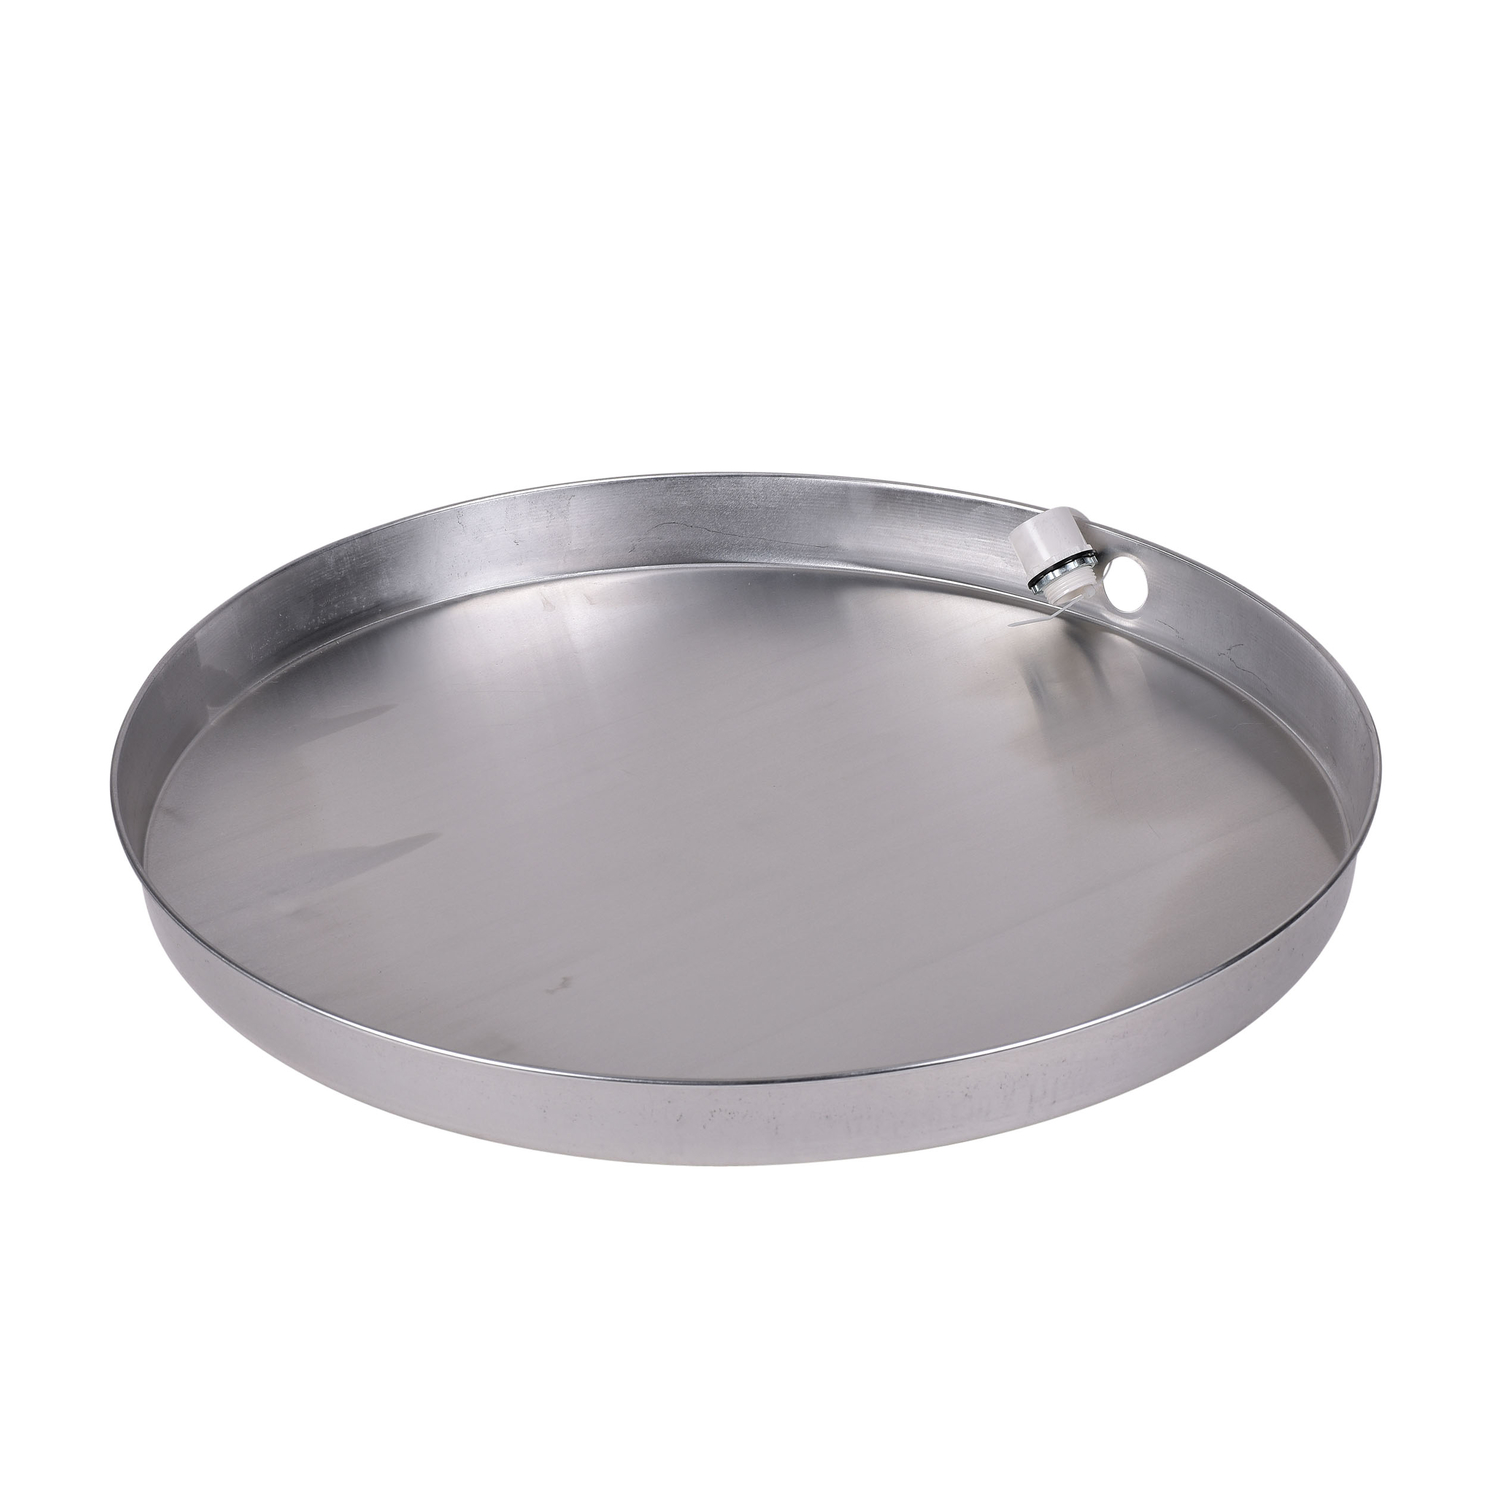 UPC 038753341538 product image for Oatey Aluminum Water Heater Pan | upcitemdb.com